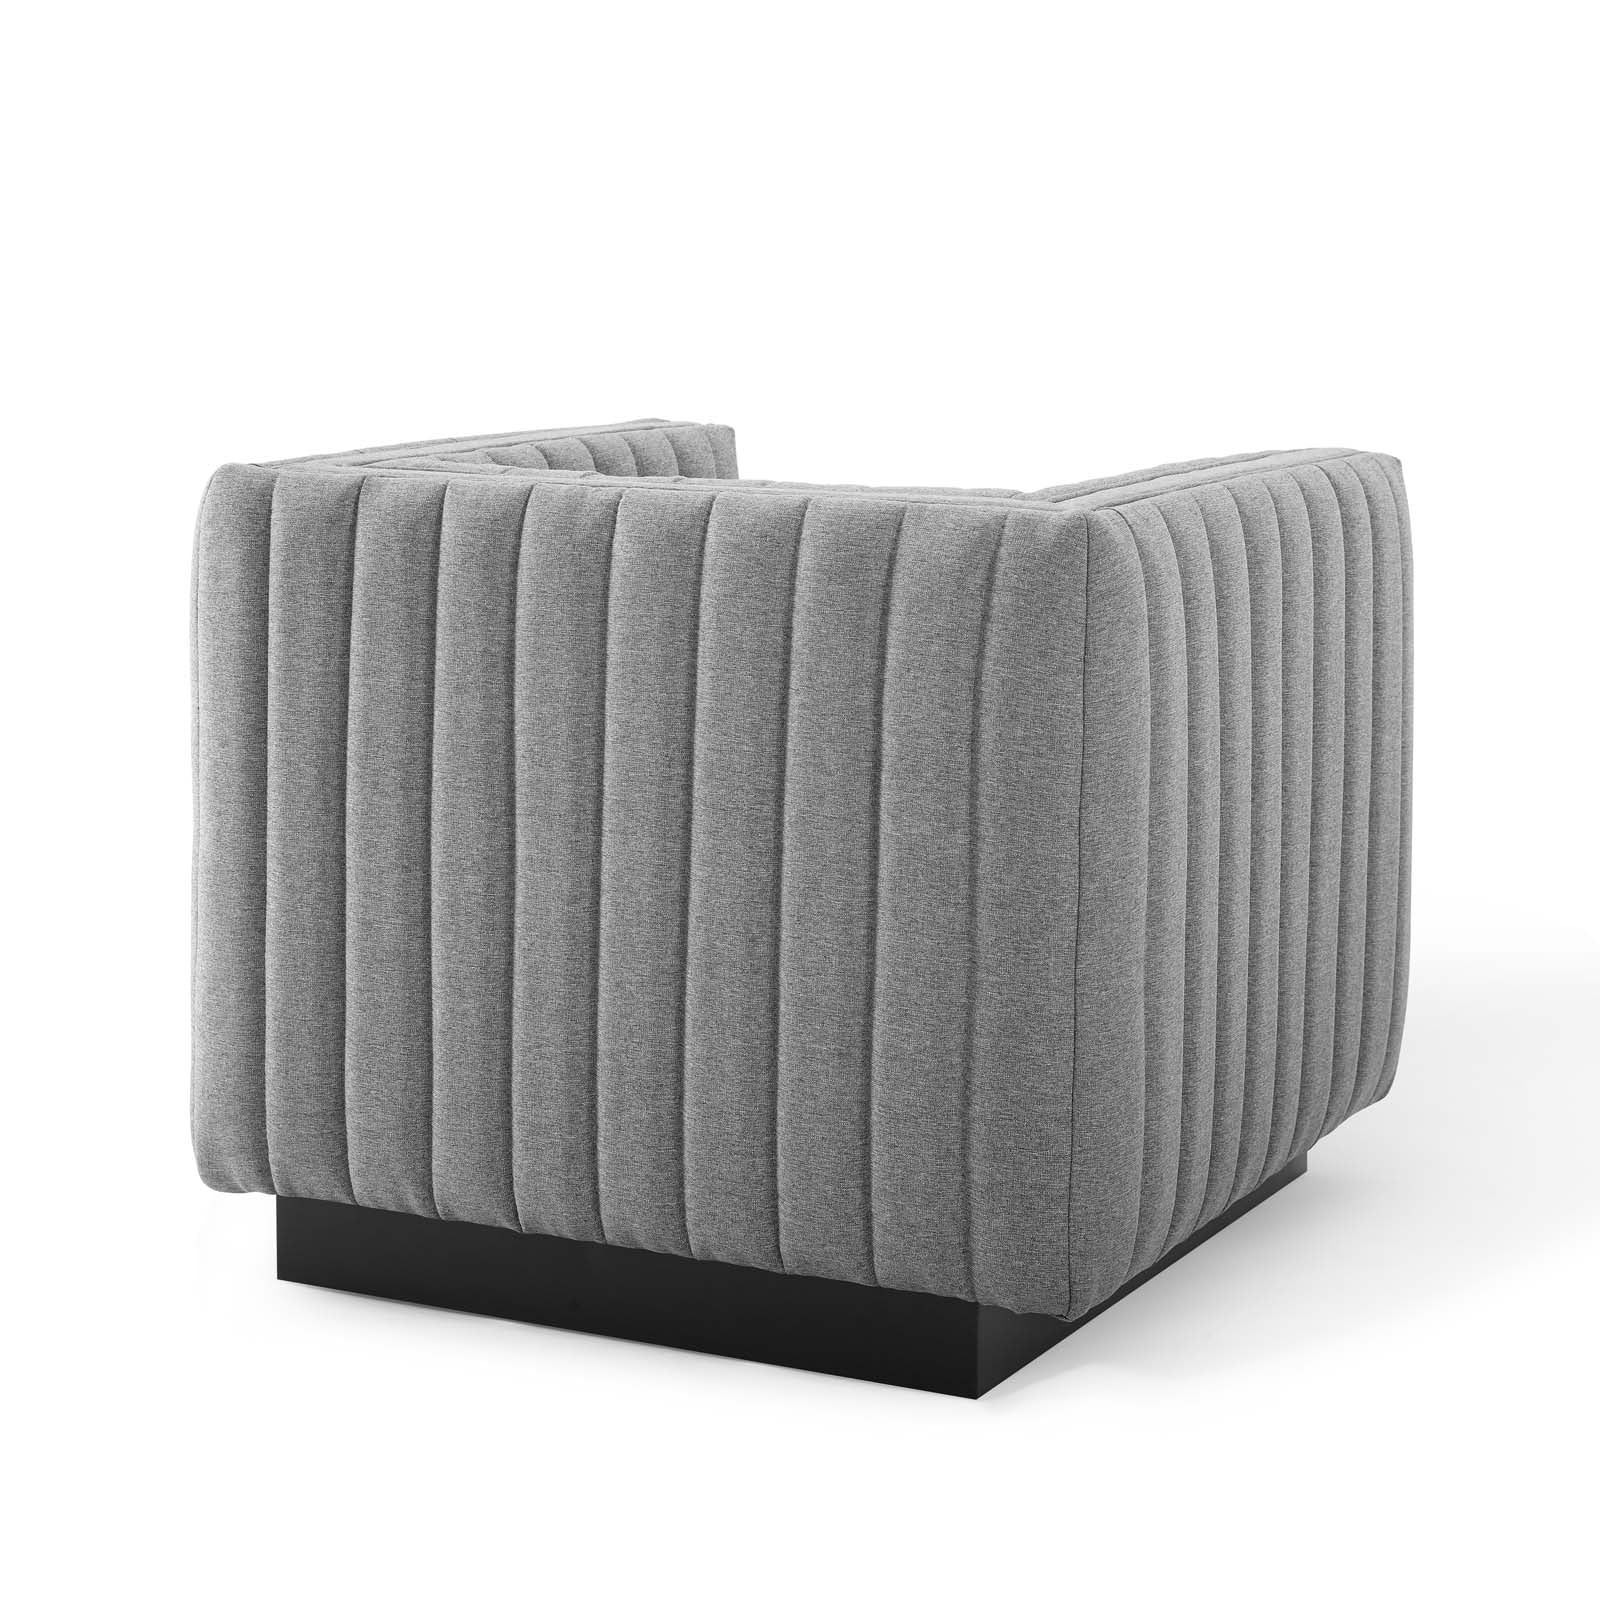 Conjure Tufted Armchair Upholstered Fabric Set of 2 - East Shore Modern Home Furnishings